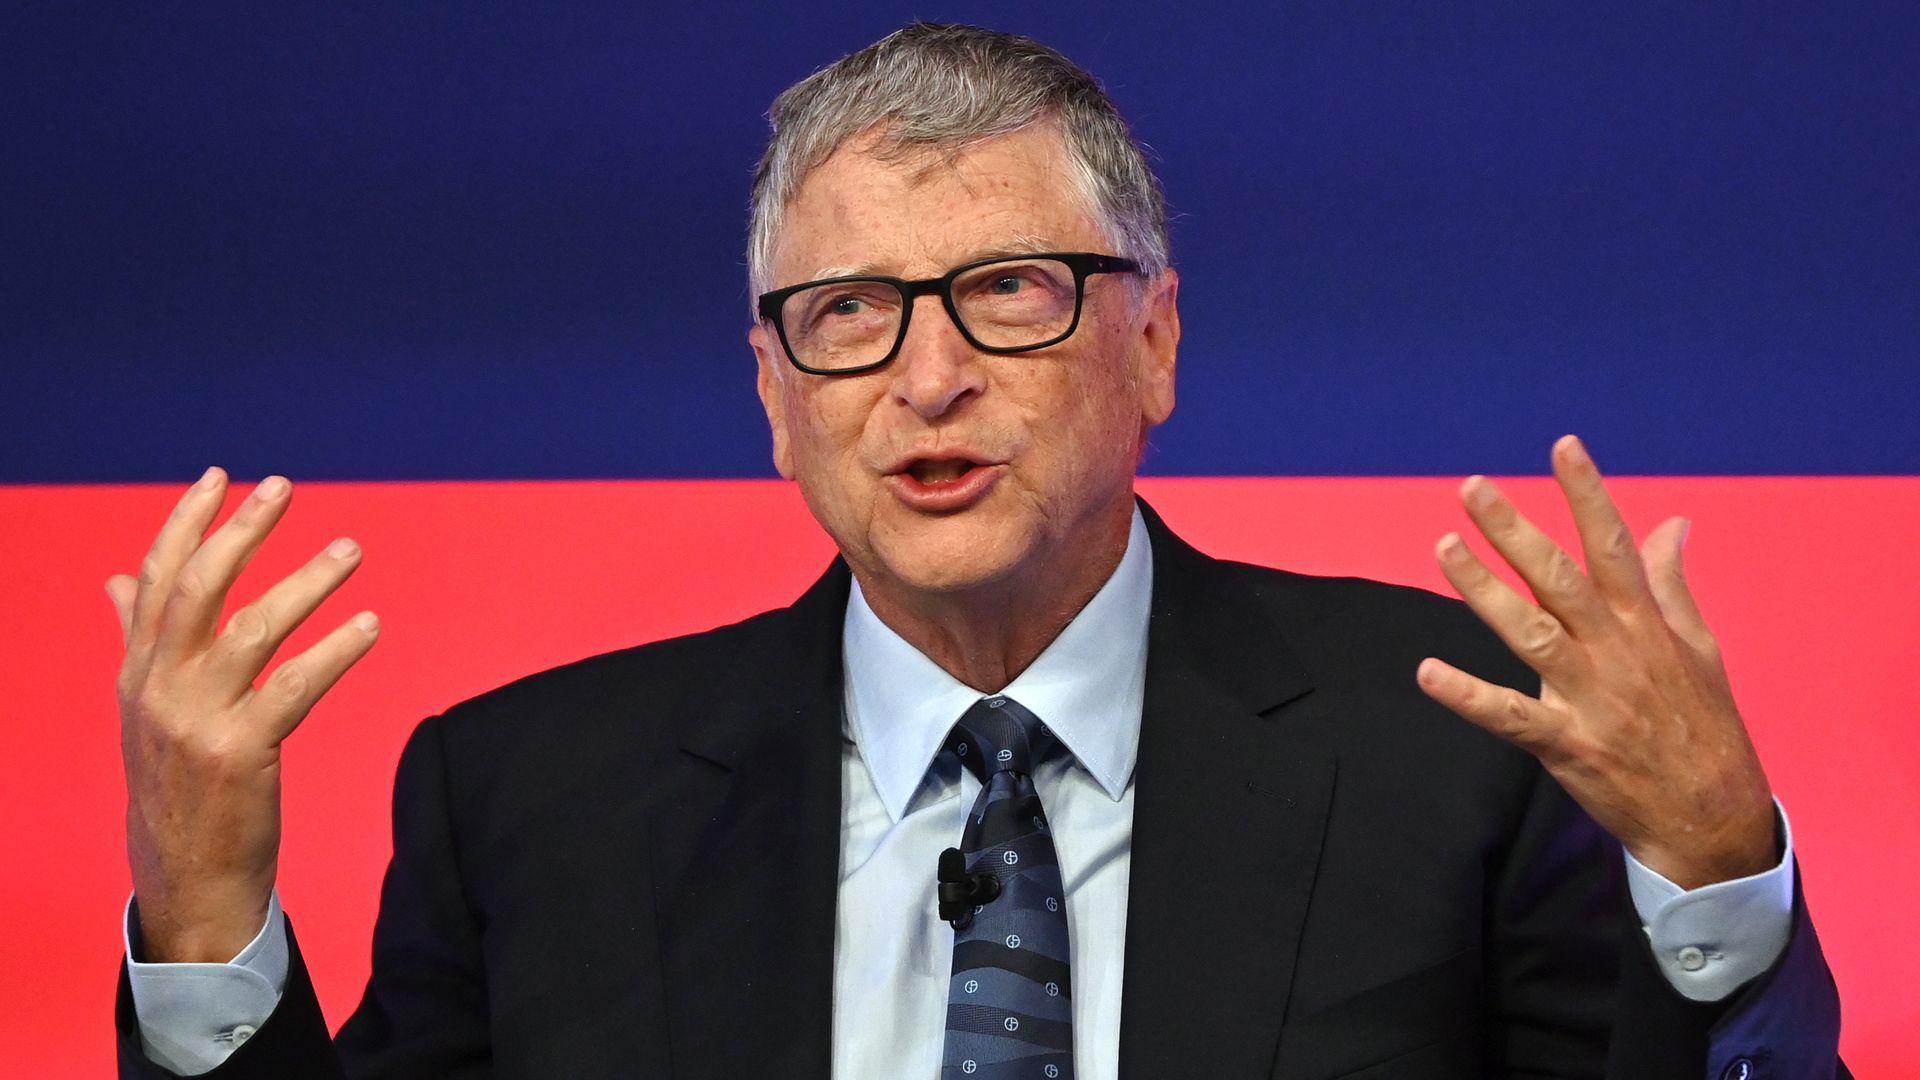 Bill Gates speaks during the Global Investment Summit at the Science Museum on October 19, 2021 in London, England.